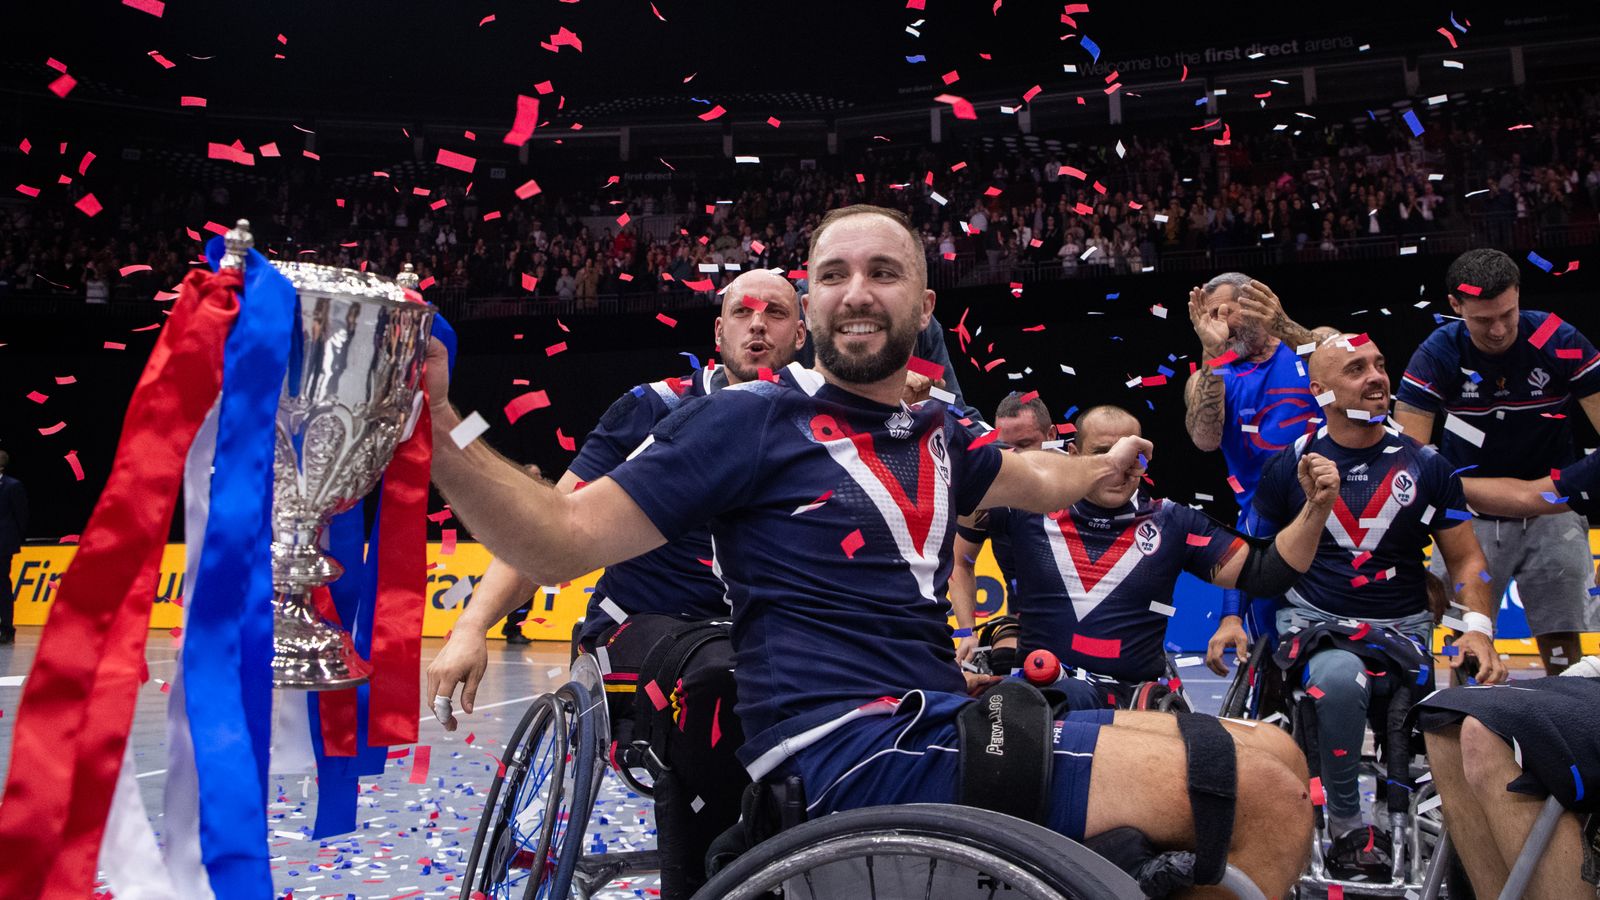 Wheelchair Rugby League: France avenge World Cup final loss with 43-34 win over England in Leeds